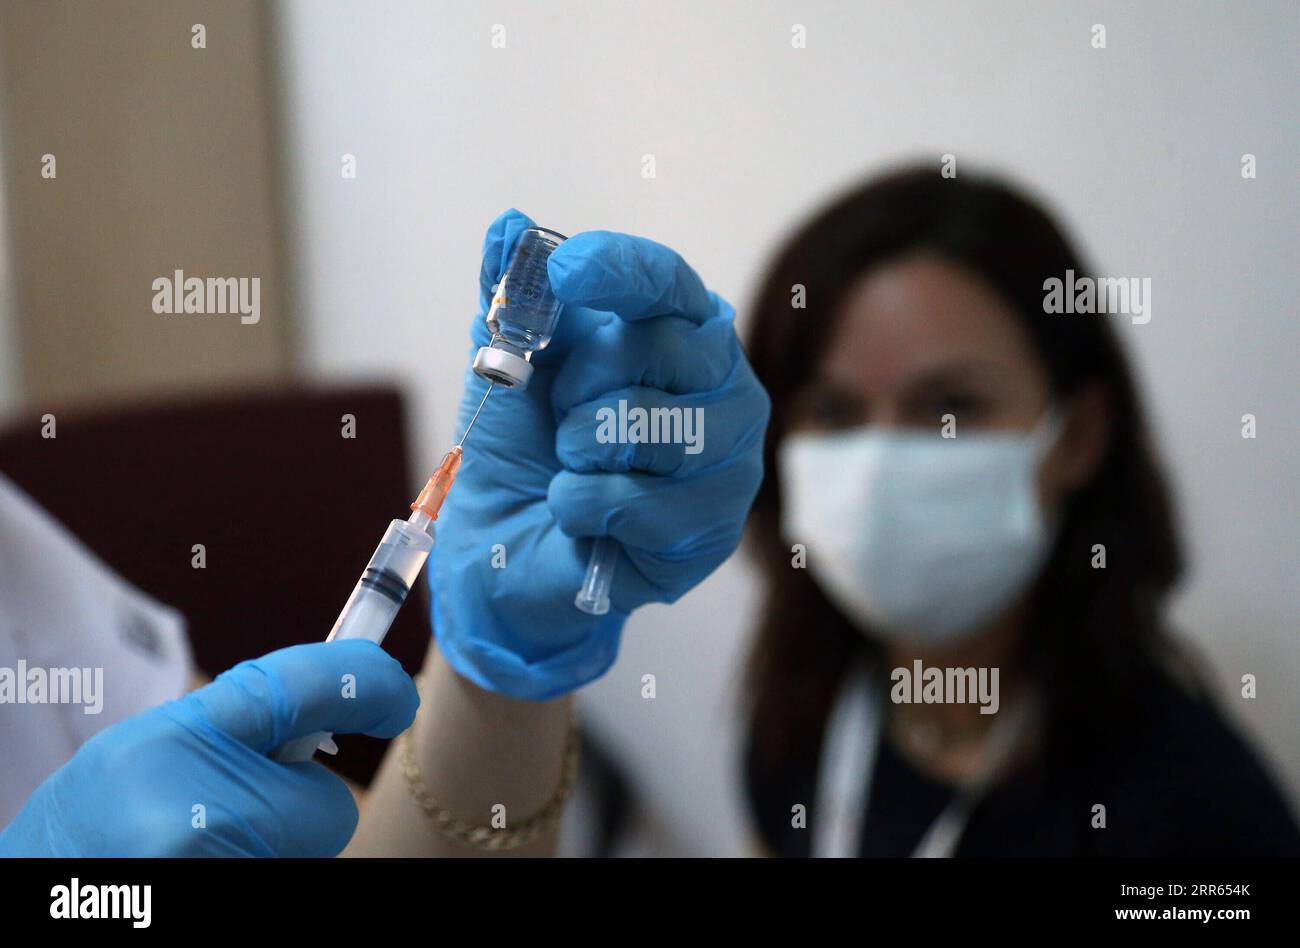 210126 -- ANKARA, Jan. 26, 2021 -- A nurse prepares a dose of the COVID-19 vaccine at a health center in Ankara, Turkey, on Jan. 26, 2021. Turkey reported on Tuesday 7,103 new COVID-19 cases, including 681 with symptoms, raising the total number in the country to 2,442,350. Photo by /Xinhua TURKEY-ANKARA-COVID-19-VACCINE MustafaxKaya PUBLICATIONxNOTxINxCHN Stock Photo